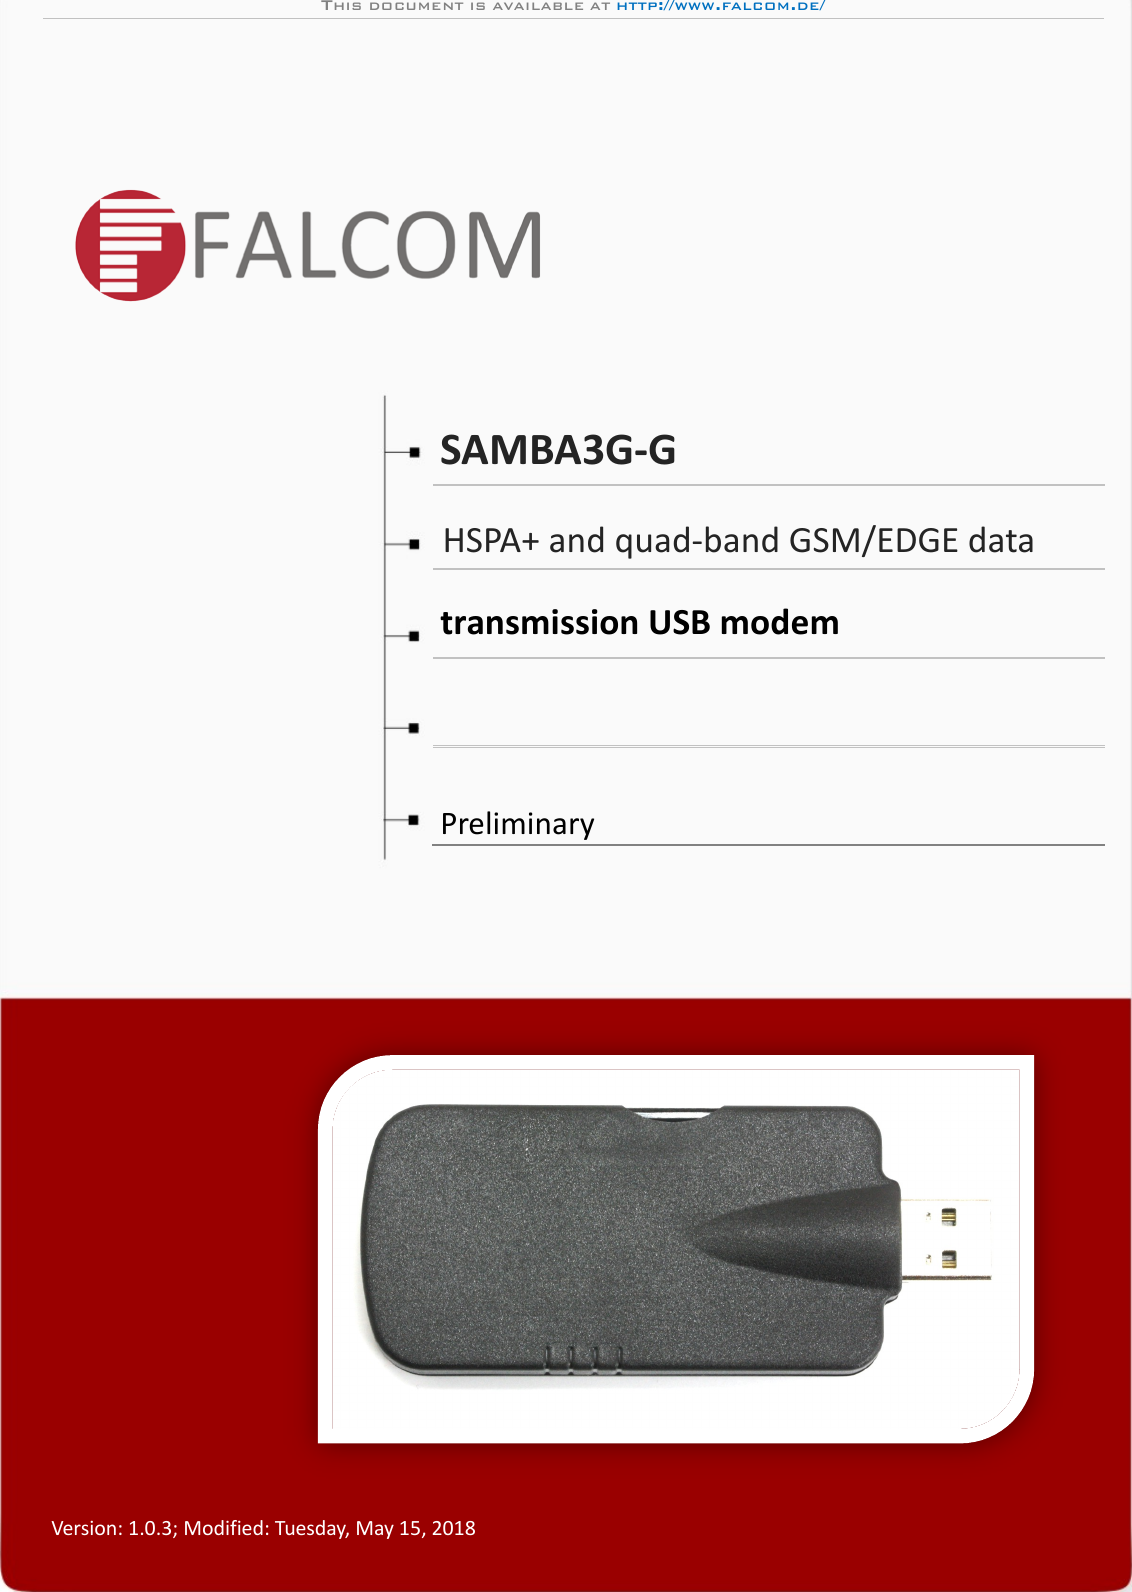 THIS DOCUMENT IS AVAILABLE AT HTTP://WWW.FALCOM.DE/ Version: 1.0.3; Modified: Tuesday, May 15, 2018                       SAMBA3G-G    HSPA+ and quad-band GSM/EDGE data  transmission USB modem  Preliminary 